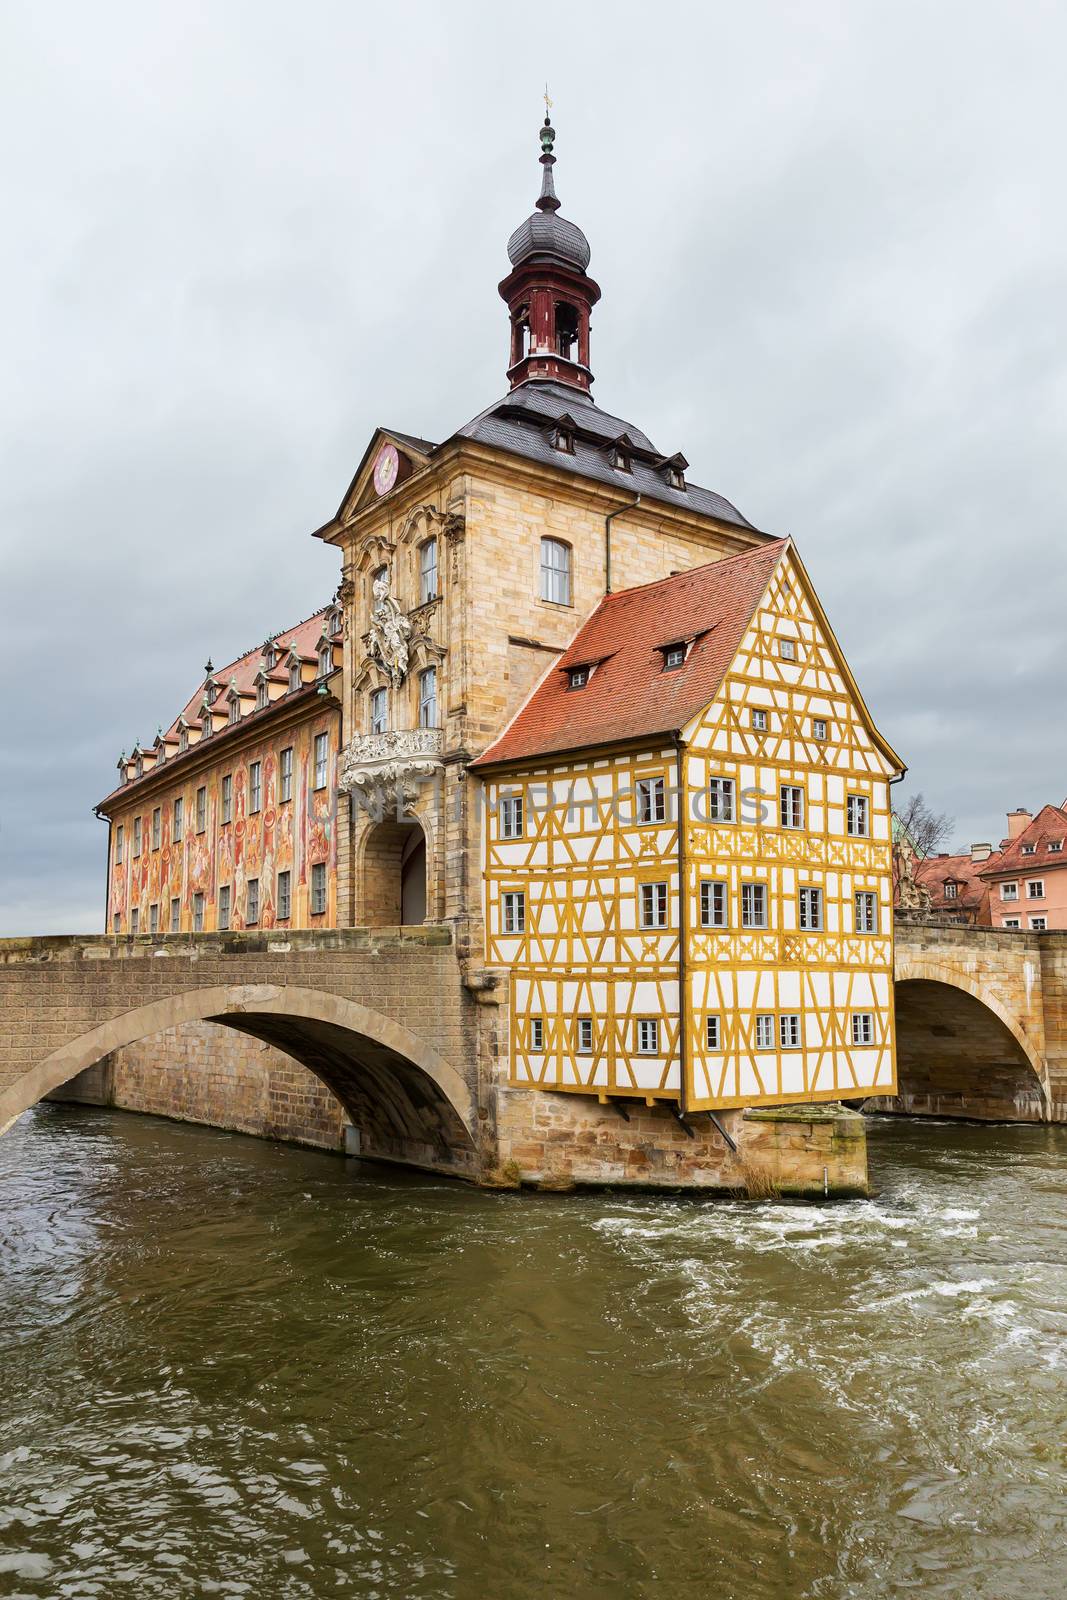 The old Town Hall in Bamberg built in the middle of the river Regnitz, in Upper Franconia, Bavaria, Germany, with facade covered with colourful frescoes.